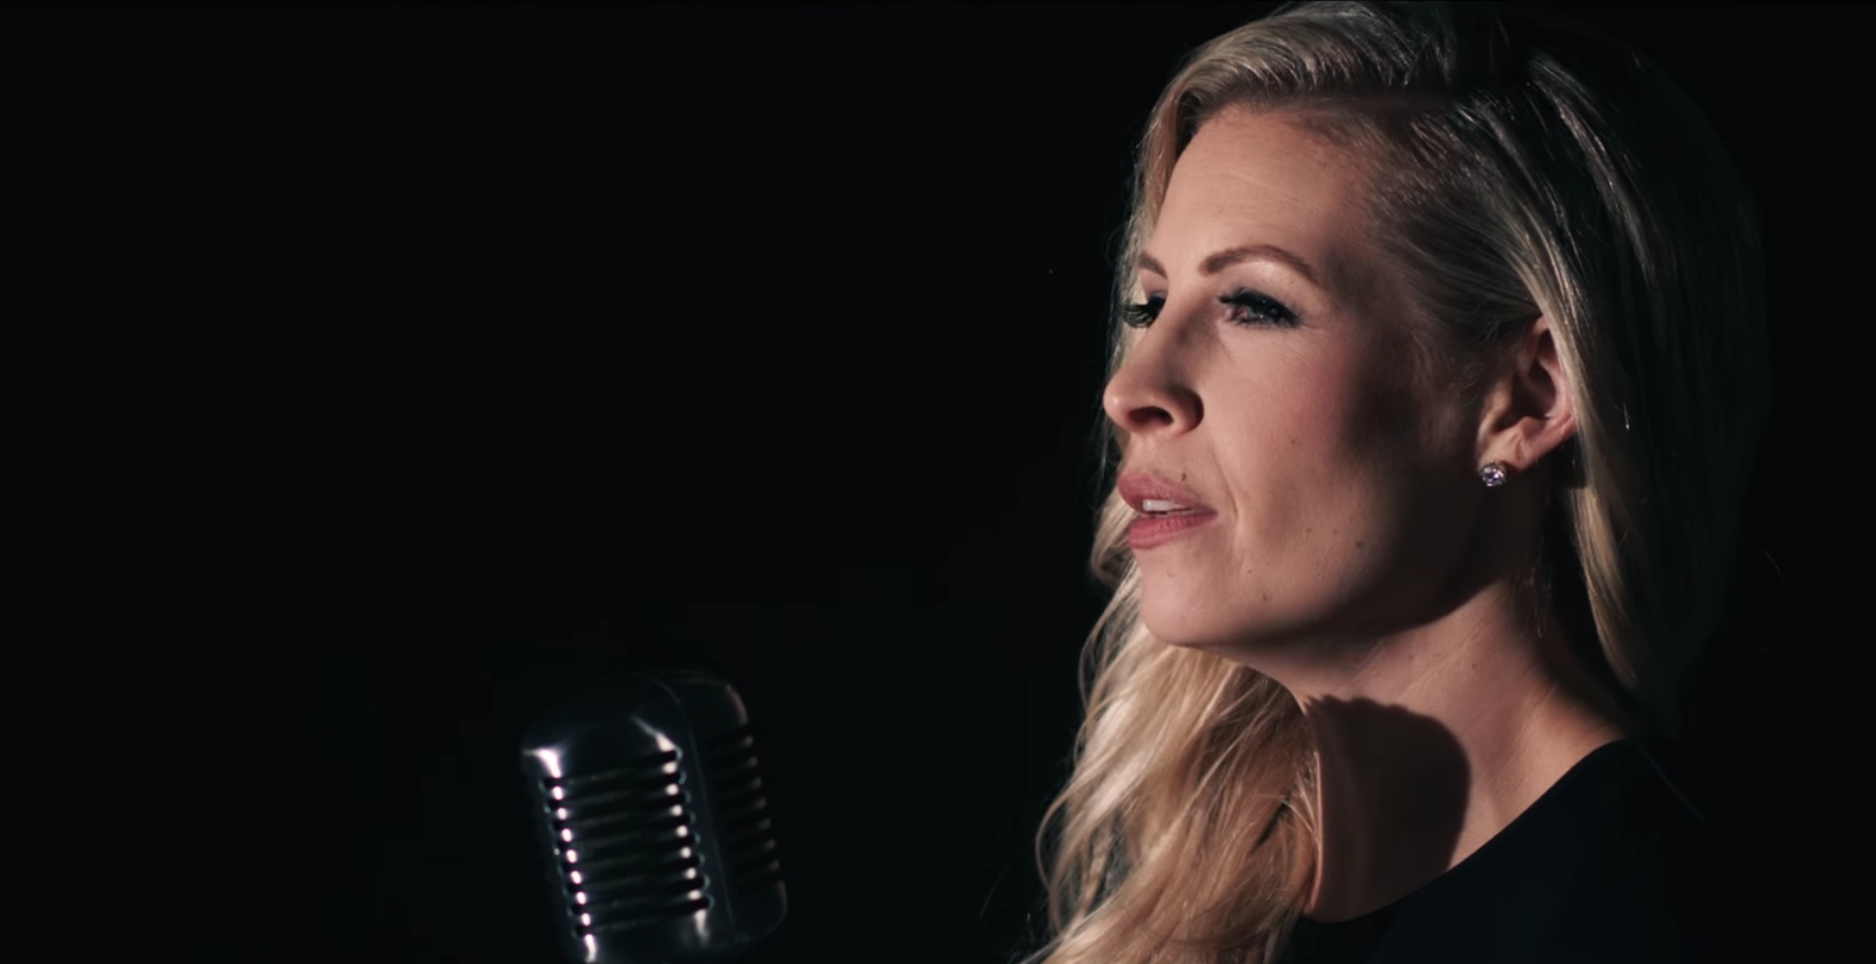 LISTEN - A Song to Sing Over Your Life: "You're Gonna Be Ok" By Jenn Johnson